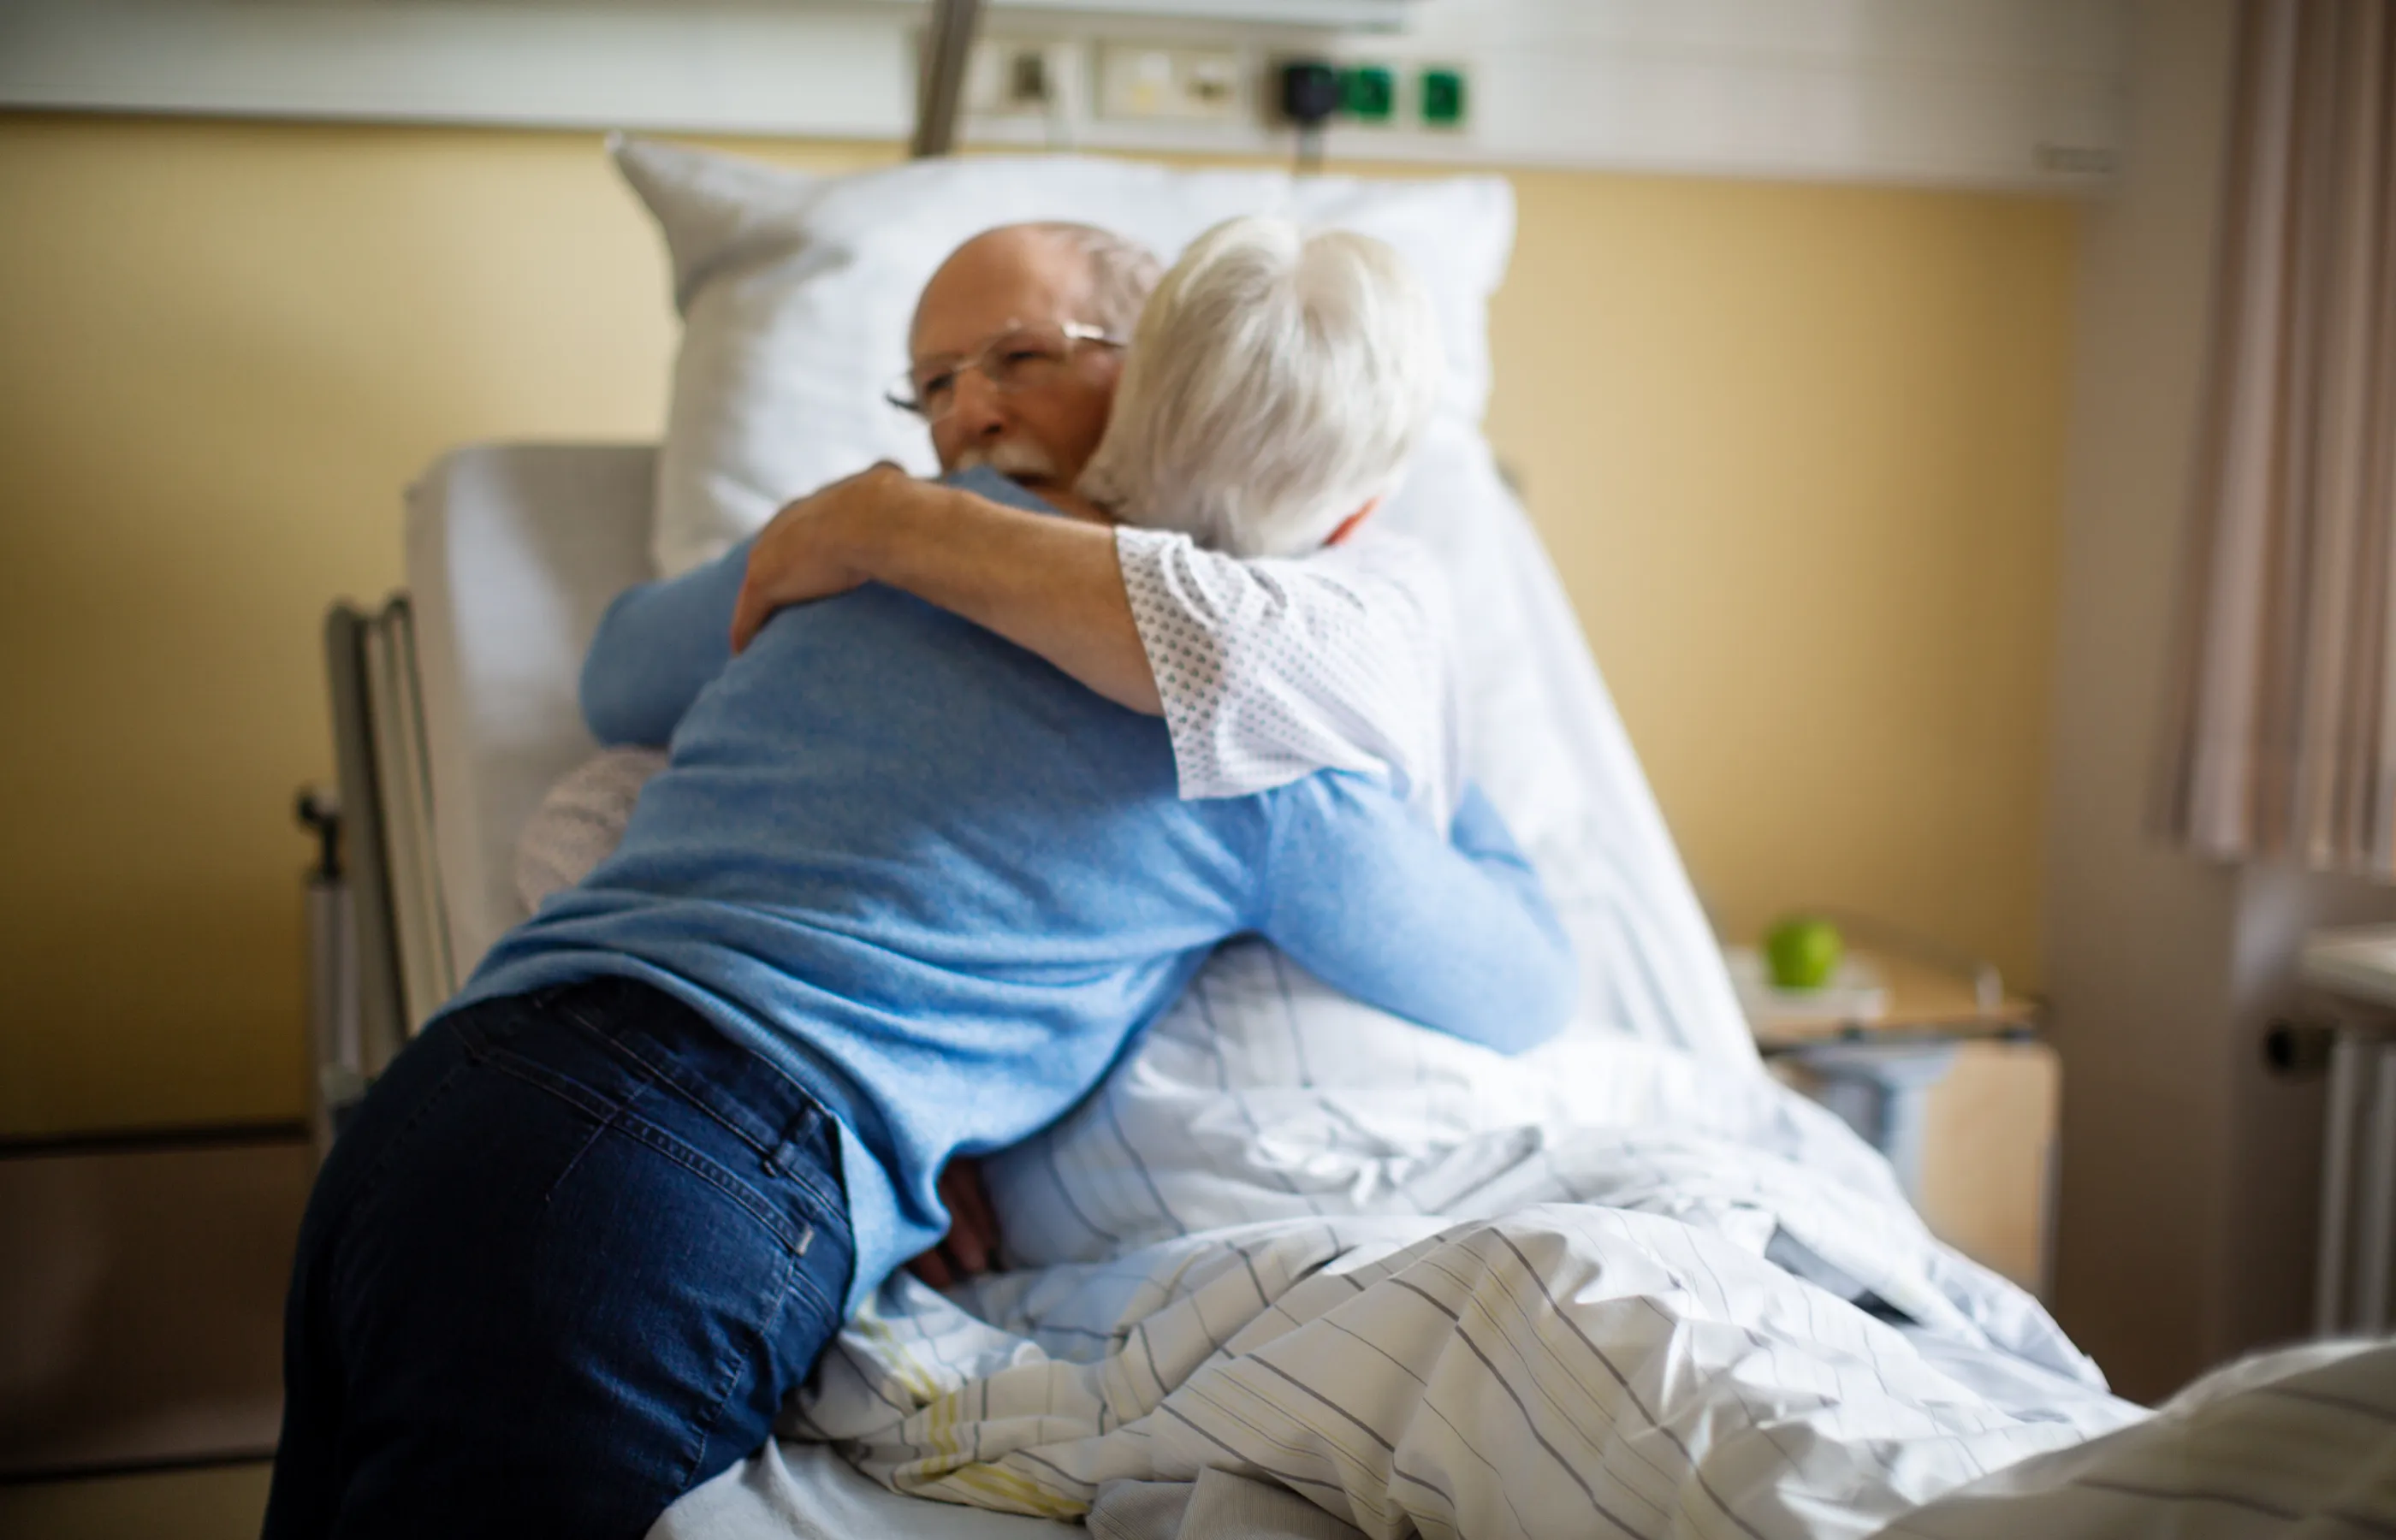 Patient and visitor in hospital room. The patient is lying in a hospital bed as the visitor hugs them. 